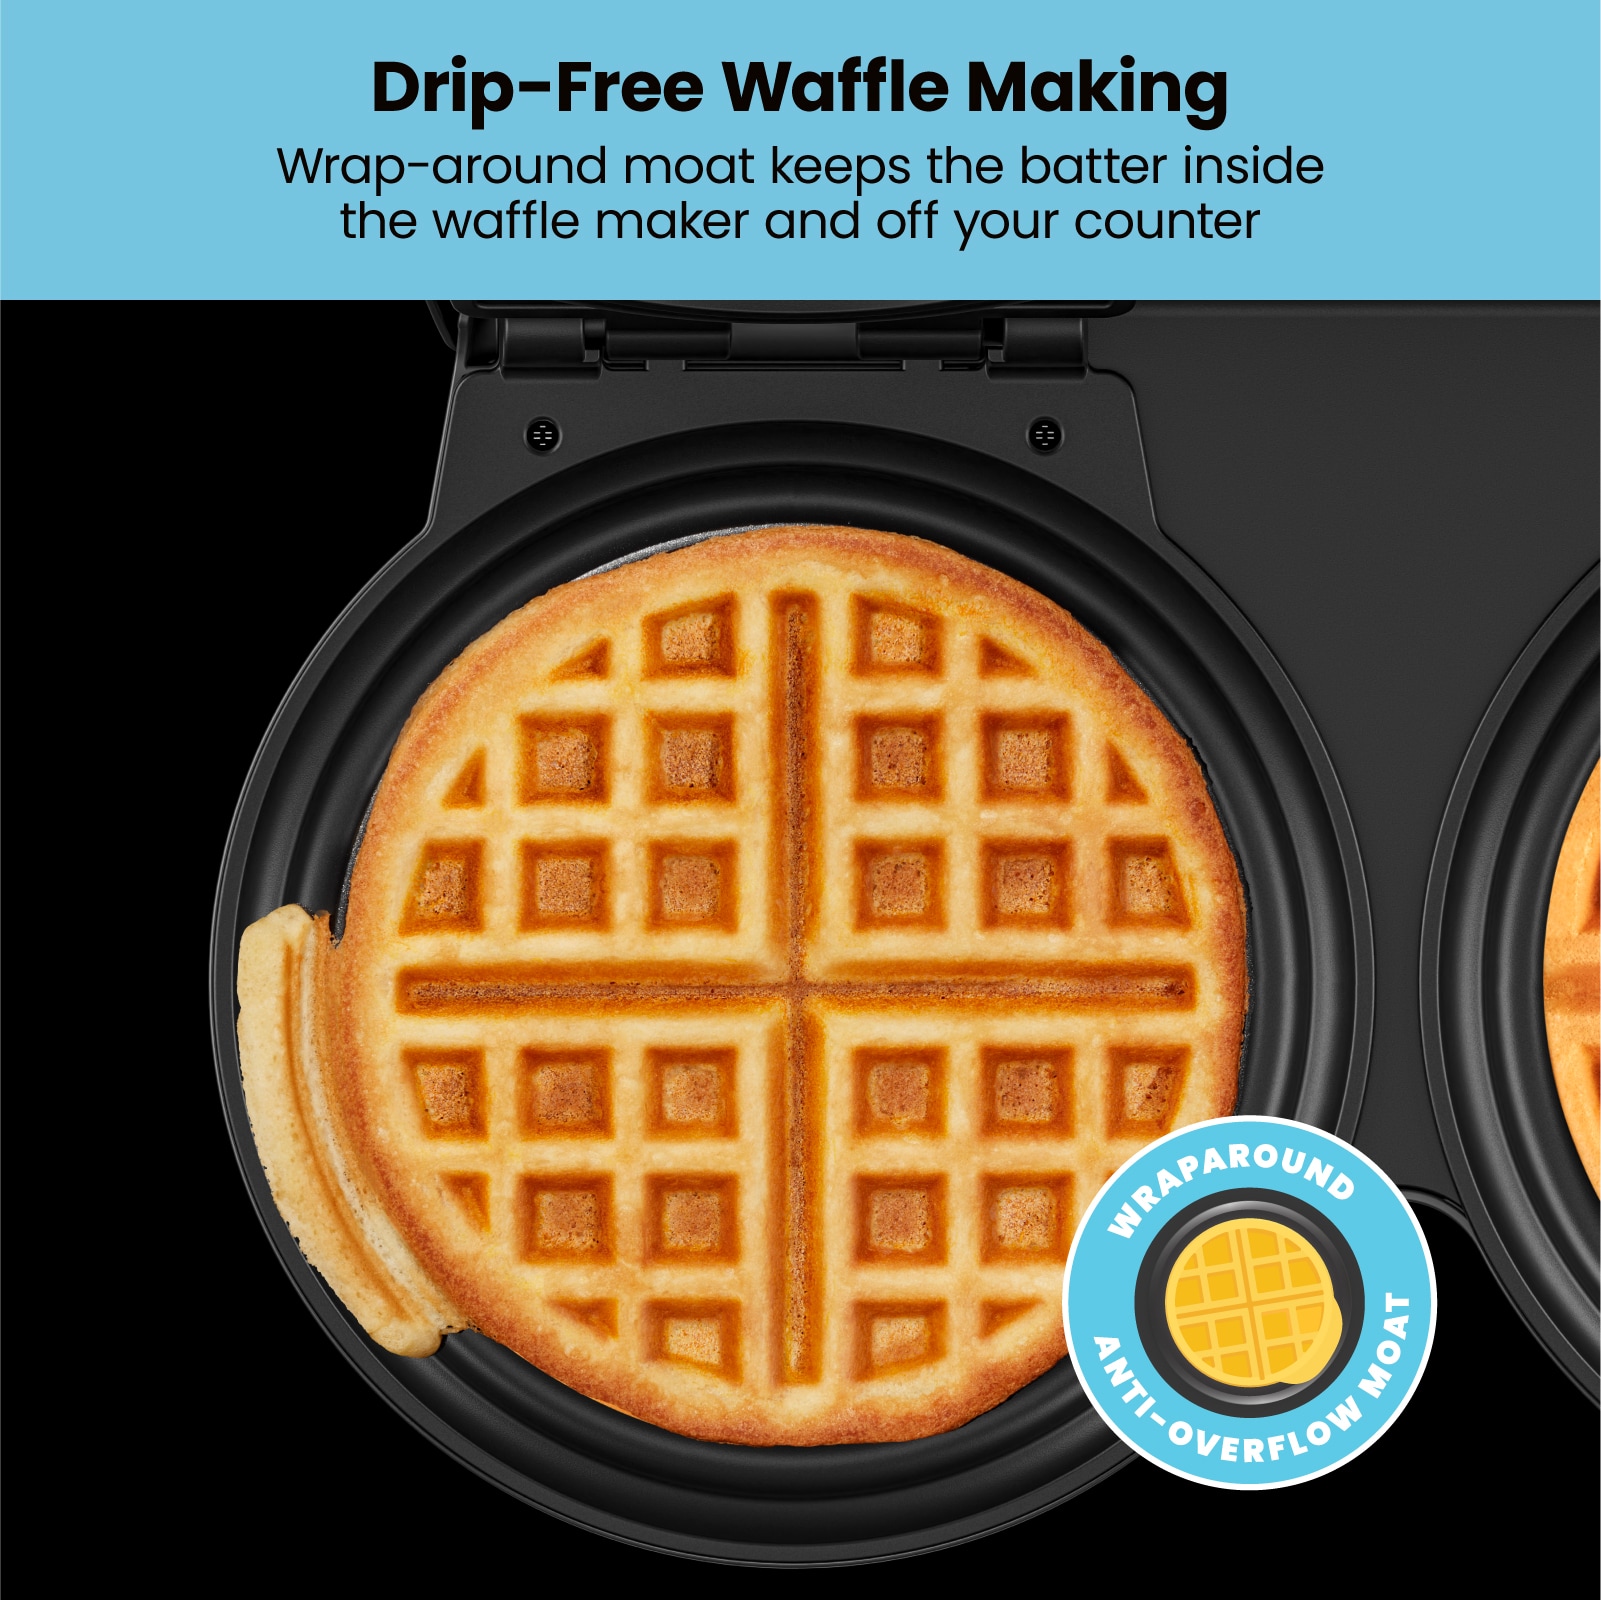 Lumme Premium Non-Stick Round Waffle Maker, ETL Safety Listed, 250 Watts, White, Quick & Easy